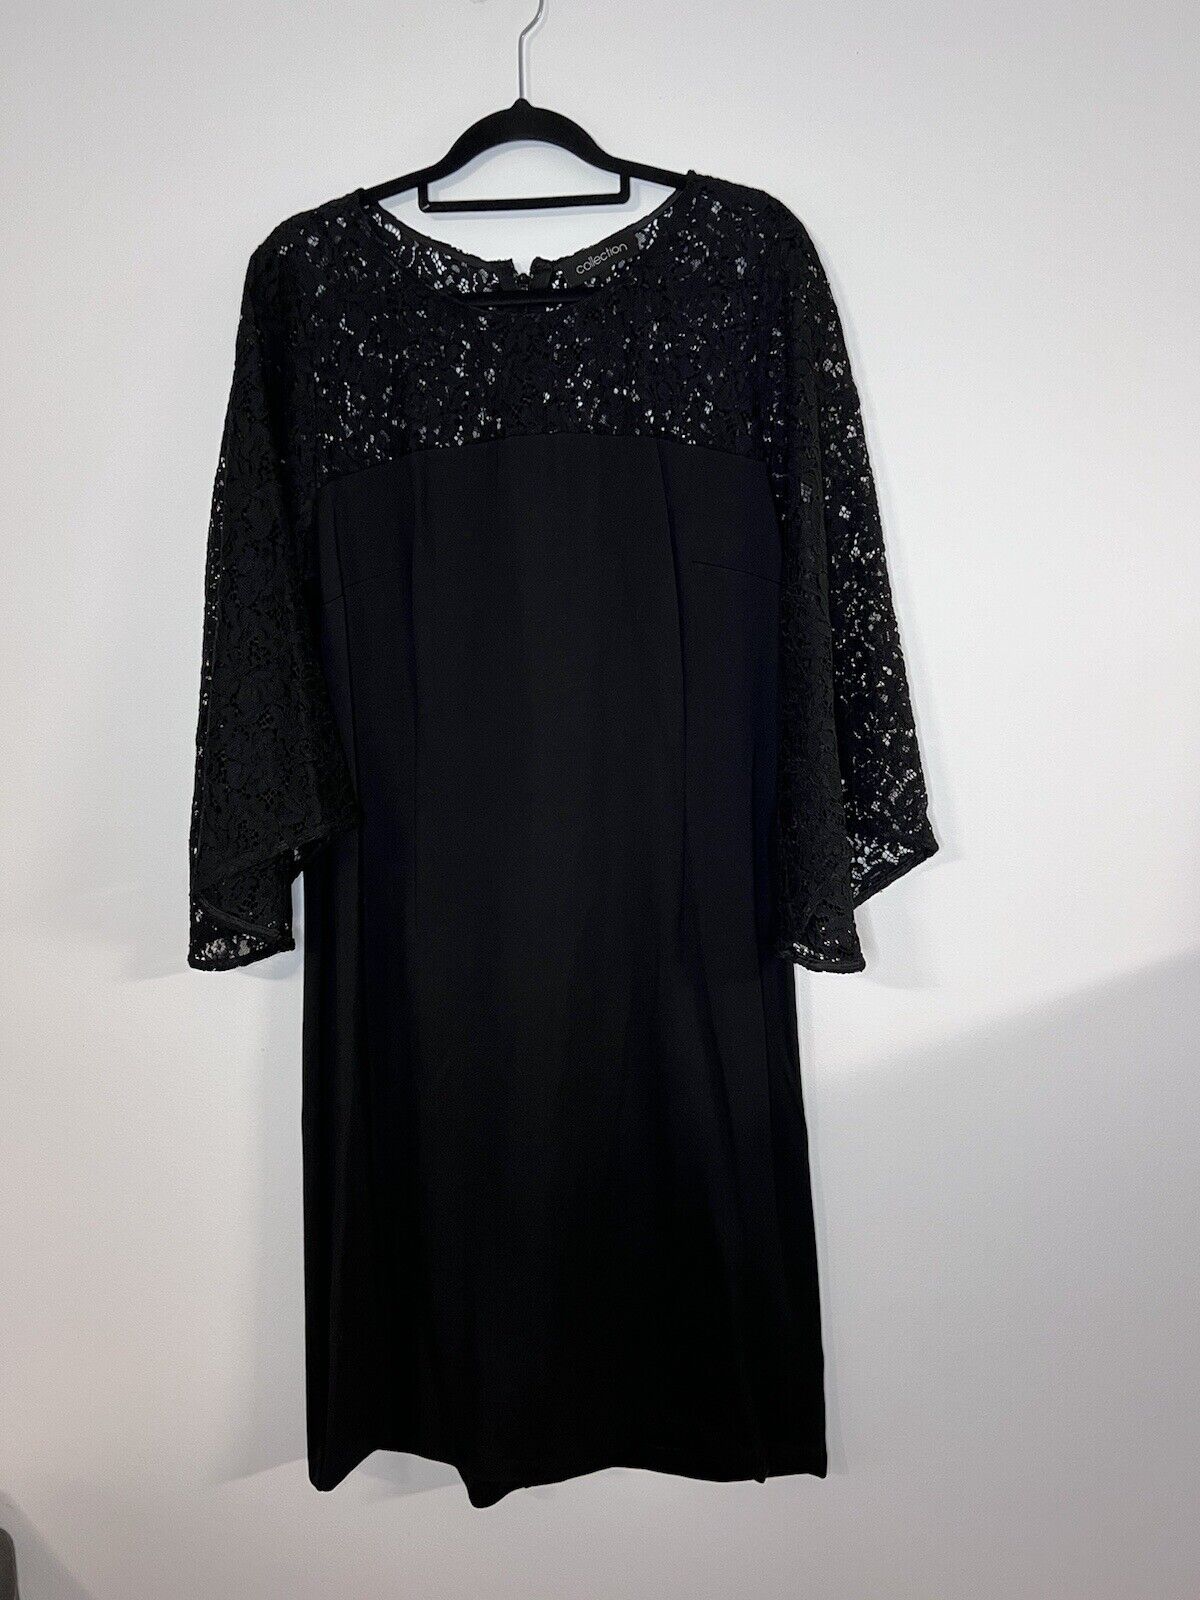 Collection Dress - Black Lace Trumpet Style Lace Sleeves. Sz 14 - NWOT.